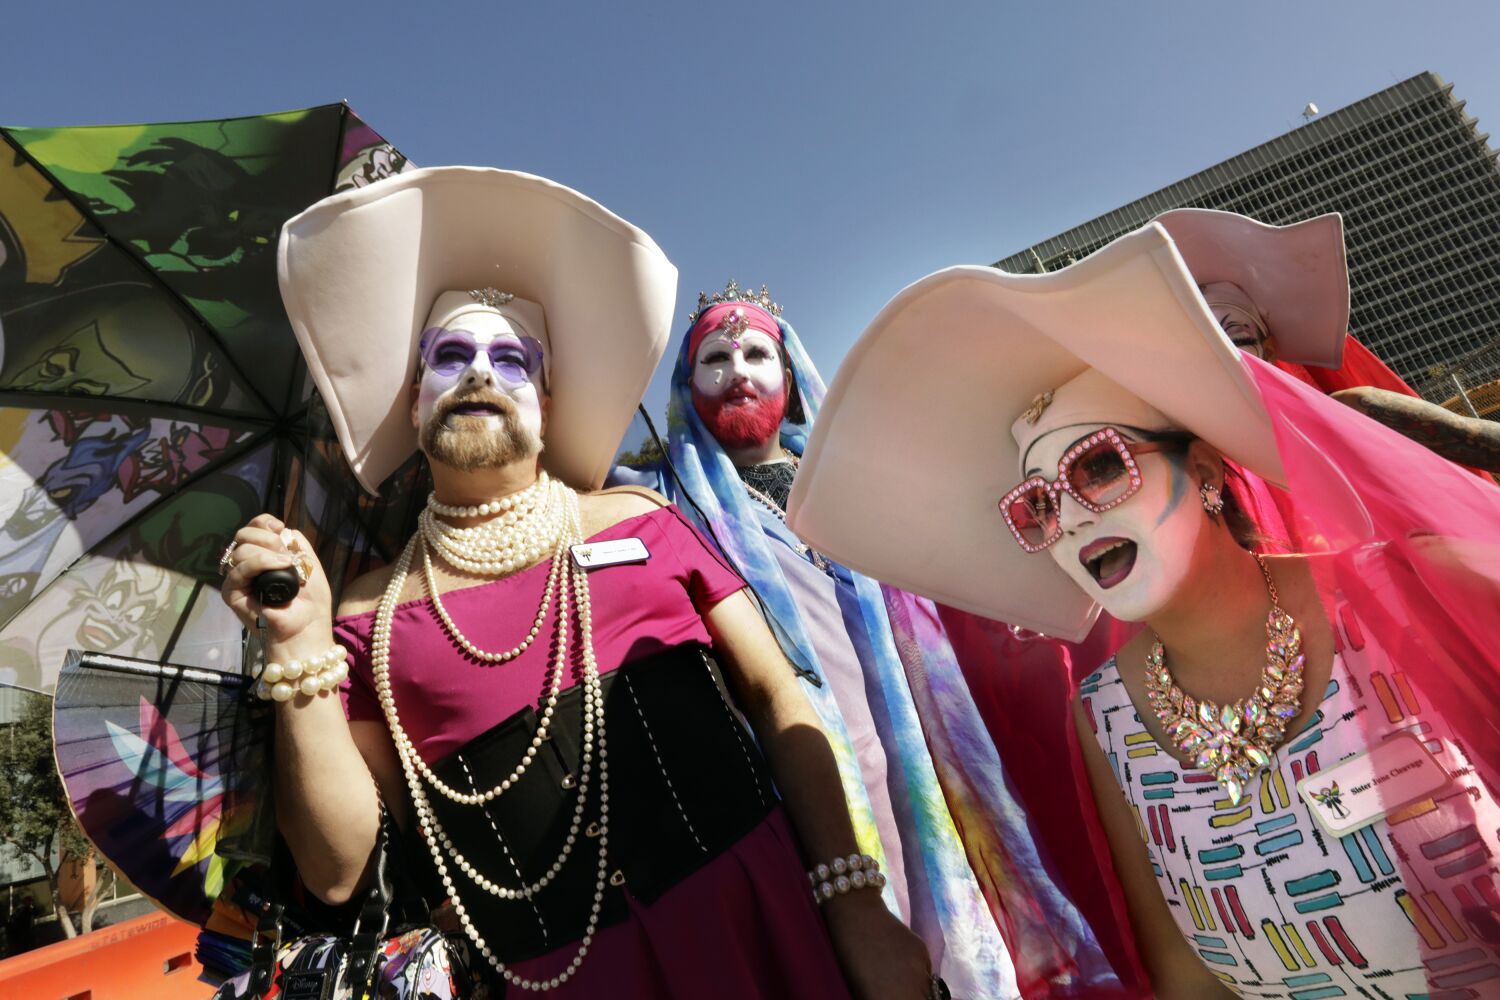 The Dodgers booted the Sisters of Perpetual Indulgence. Then came a big-league backlash